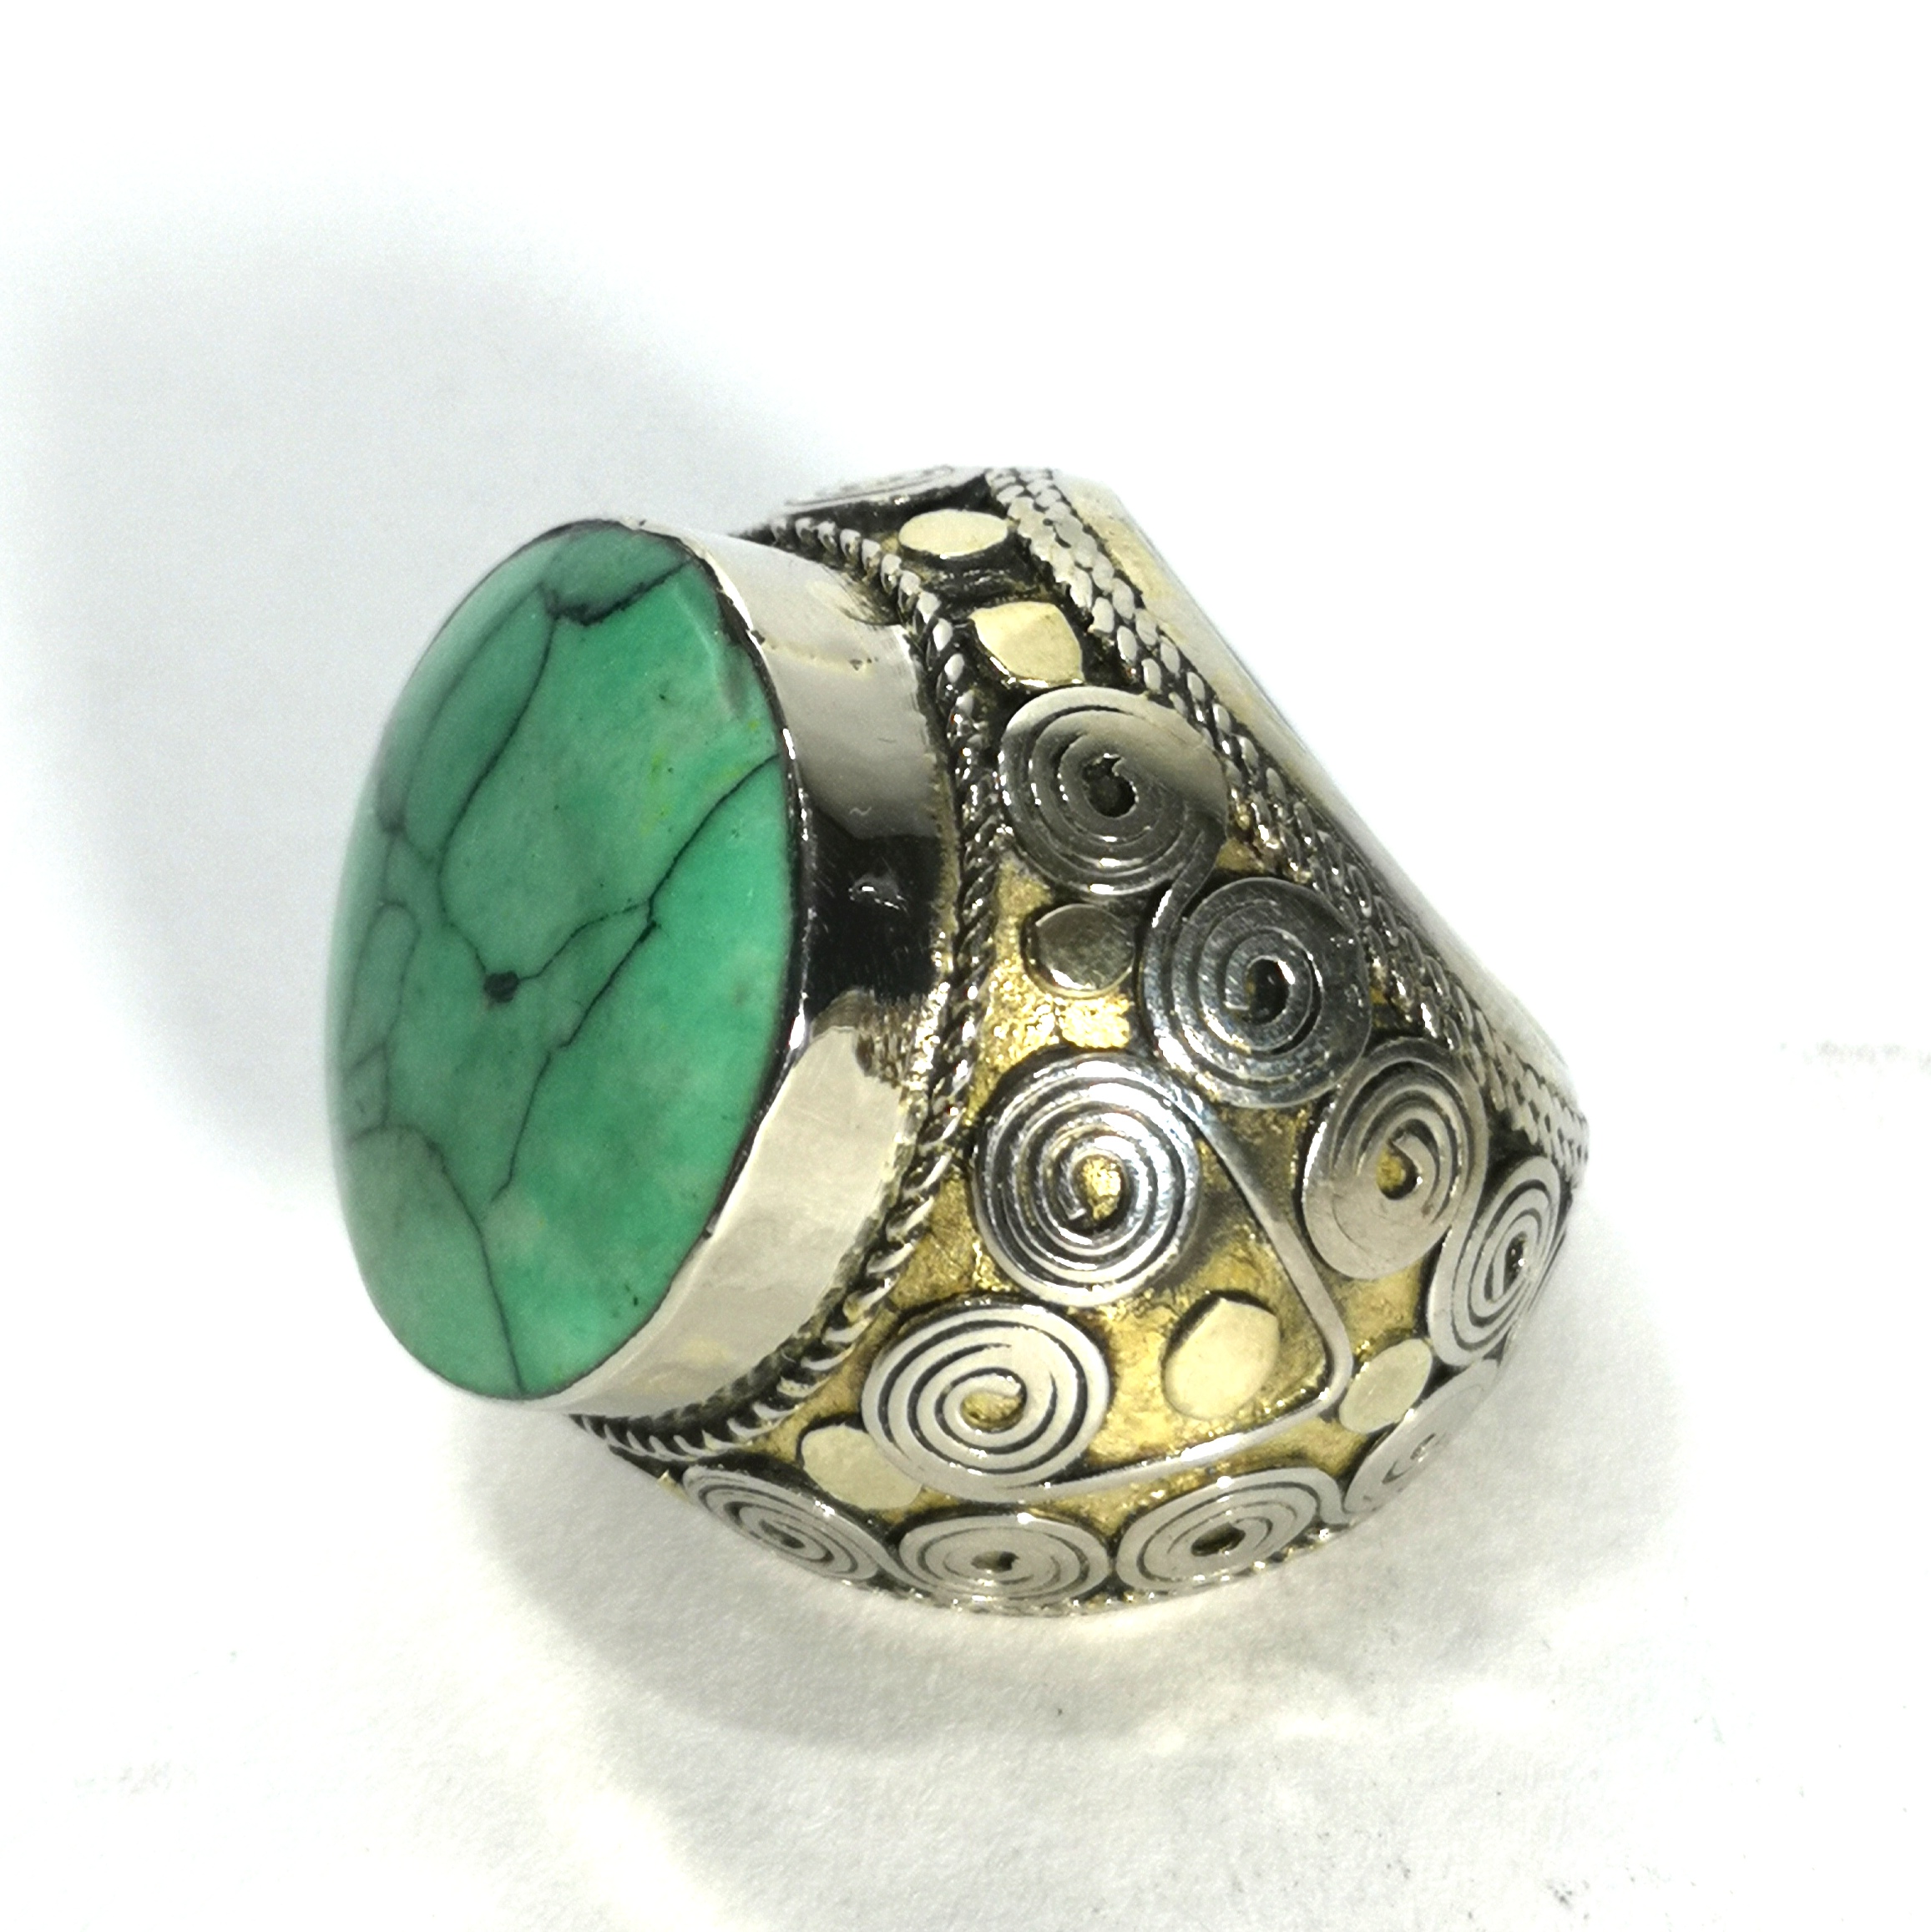 Antique Middle Eastern Turquoise Tribal Ring - Narissa Mather